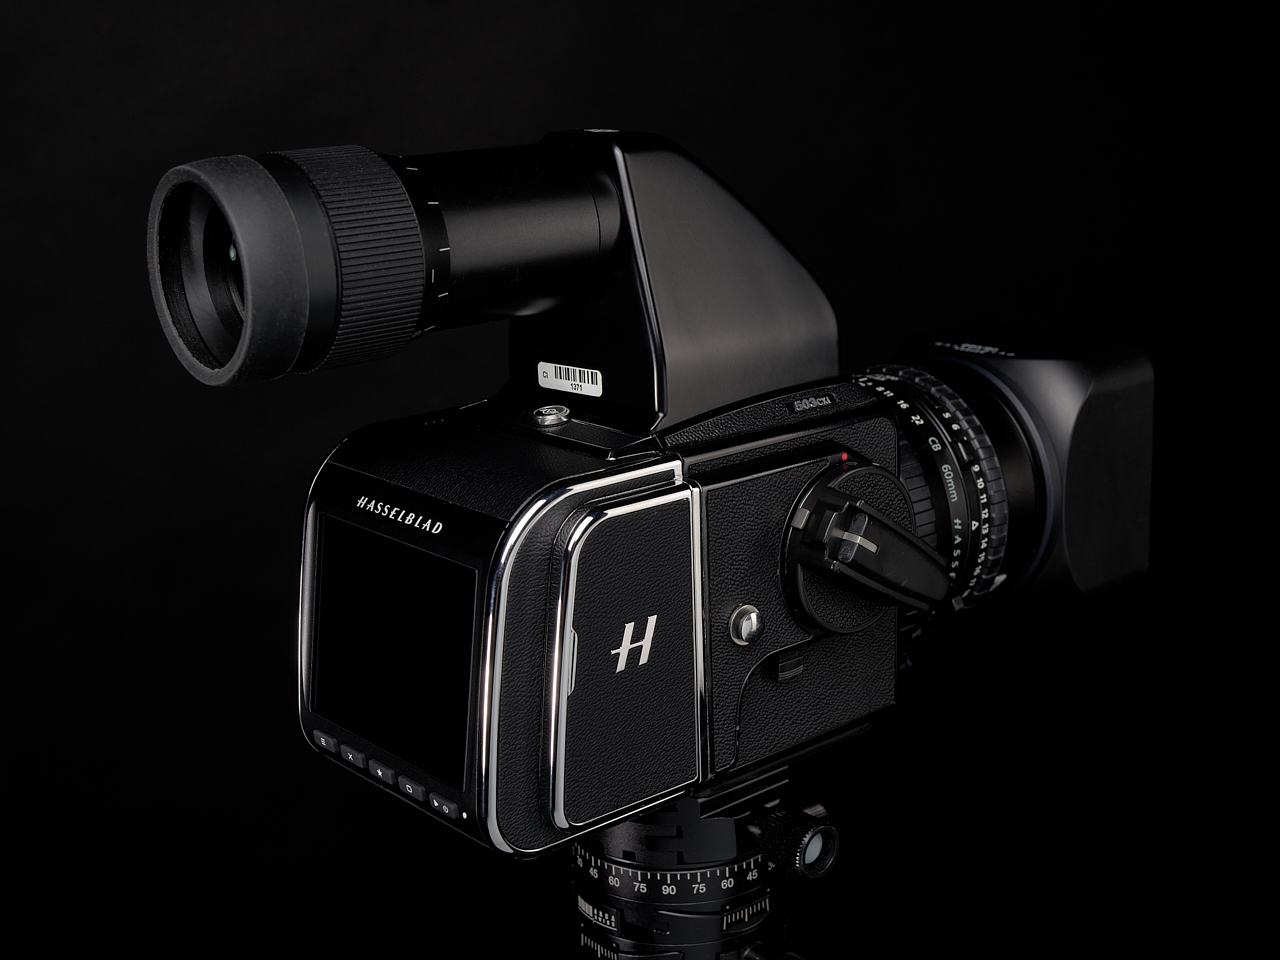 Hasselblad 50C Digital back paired with Hasselblad 500CXi and 60mm CB Lens